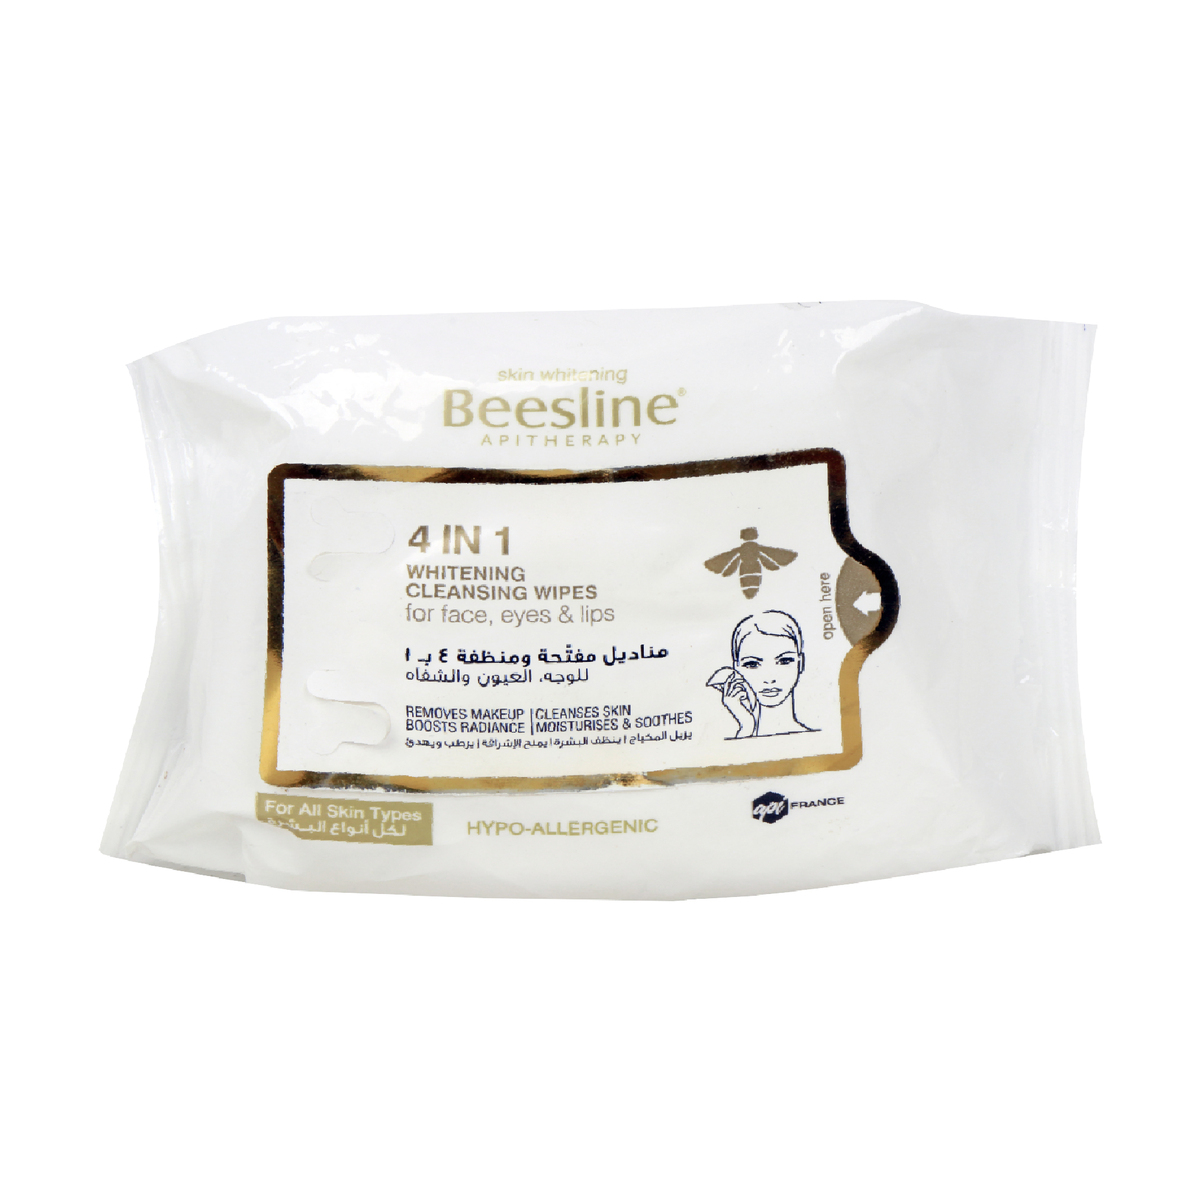 Beesline 4in1 Cleansing Wipes Whitening For Face, Eyes & Lips 1pkt